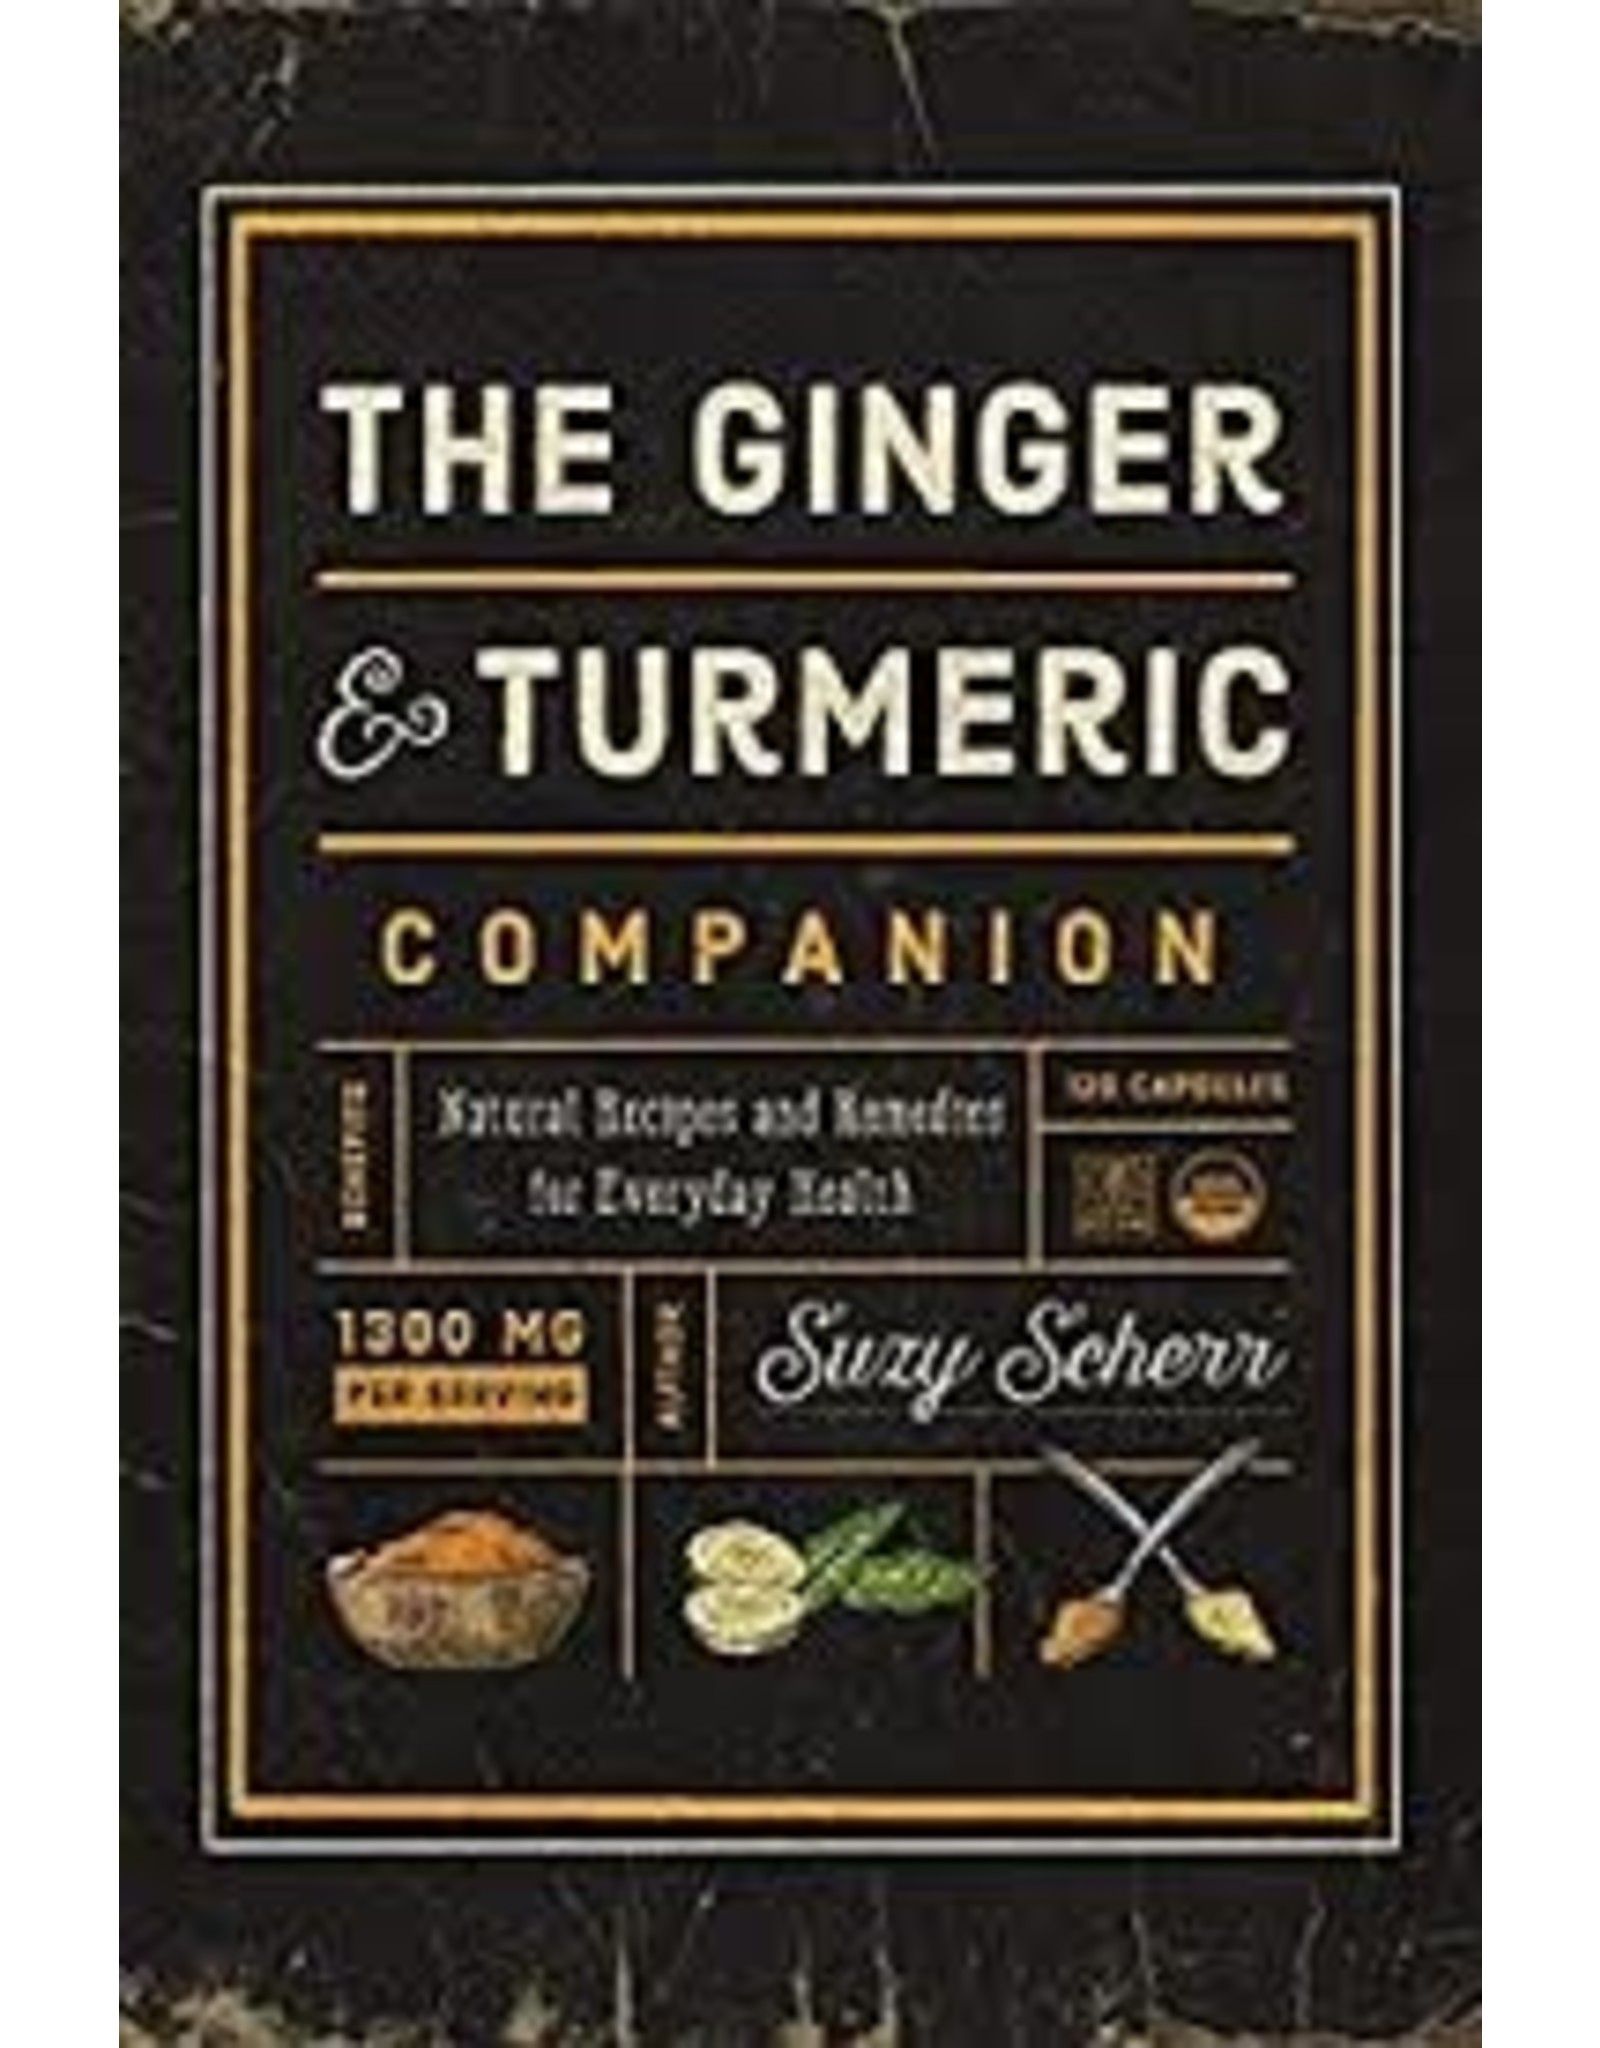 Books The Ginger Turmeric by Suzy Scherr (sourceathome)